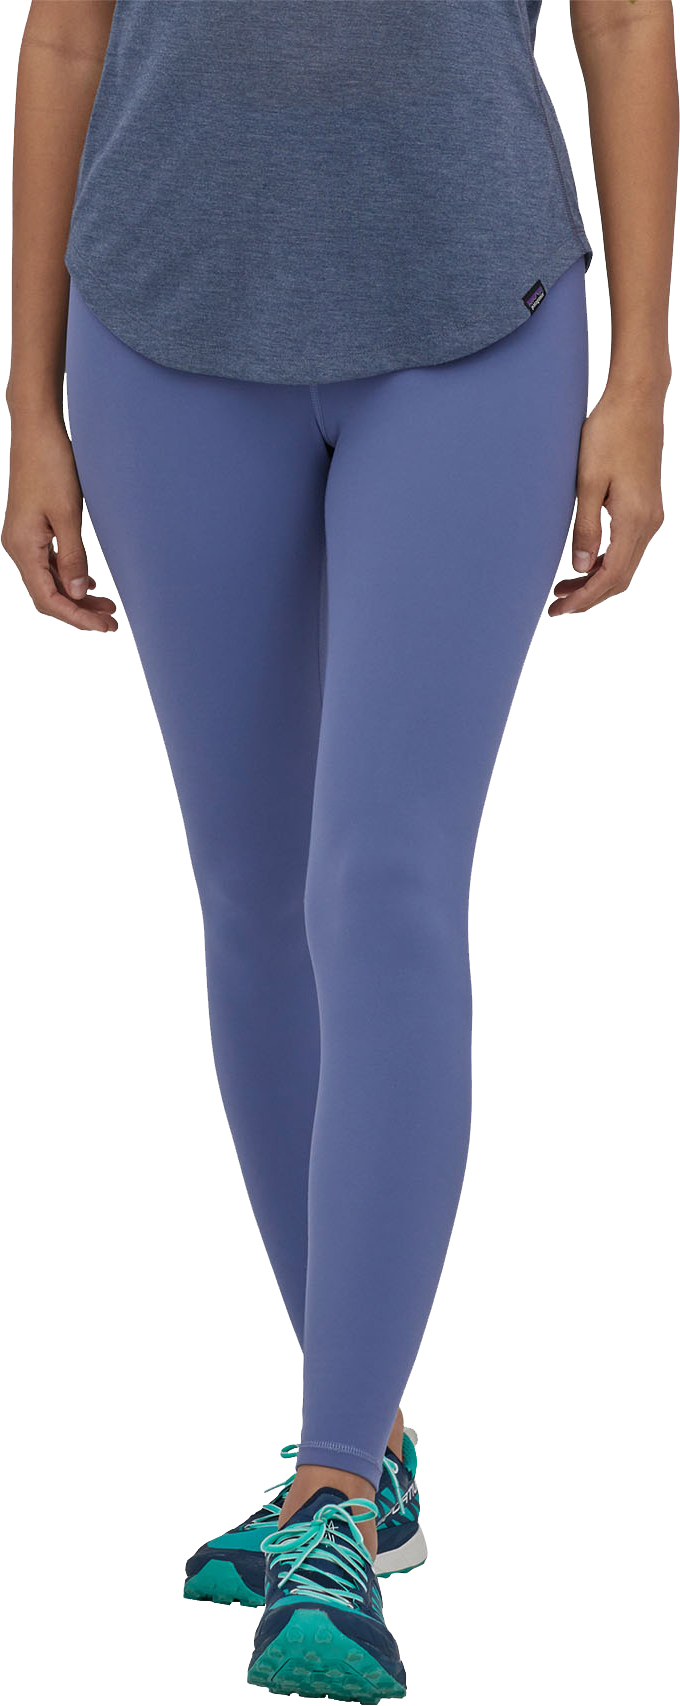 Patagonia Women's Maipo 7/8 Tights Sale